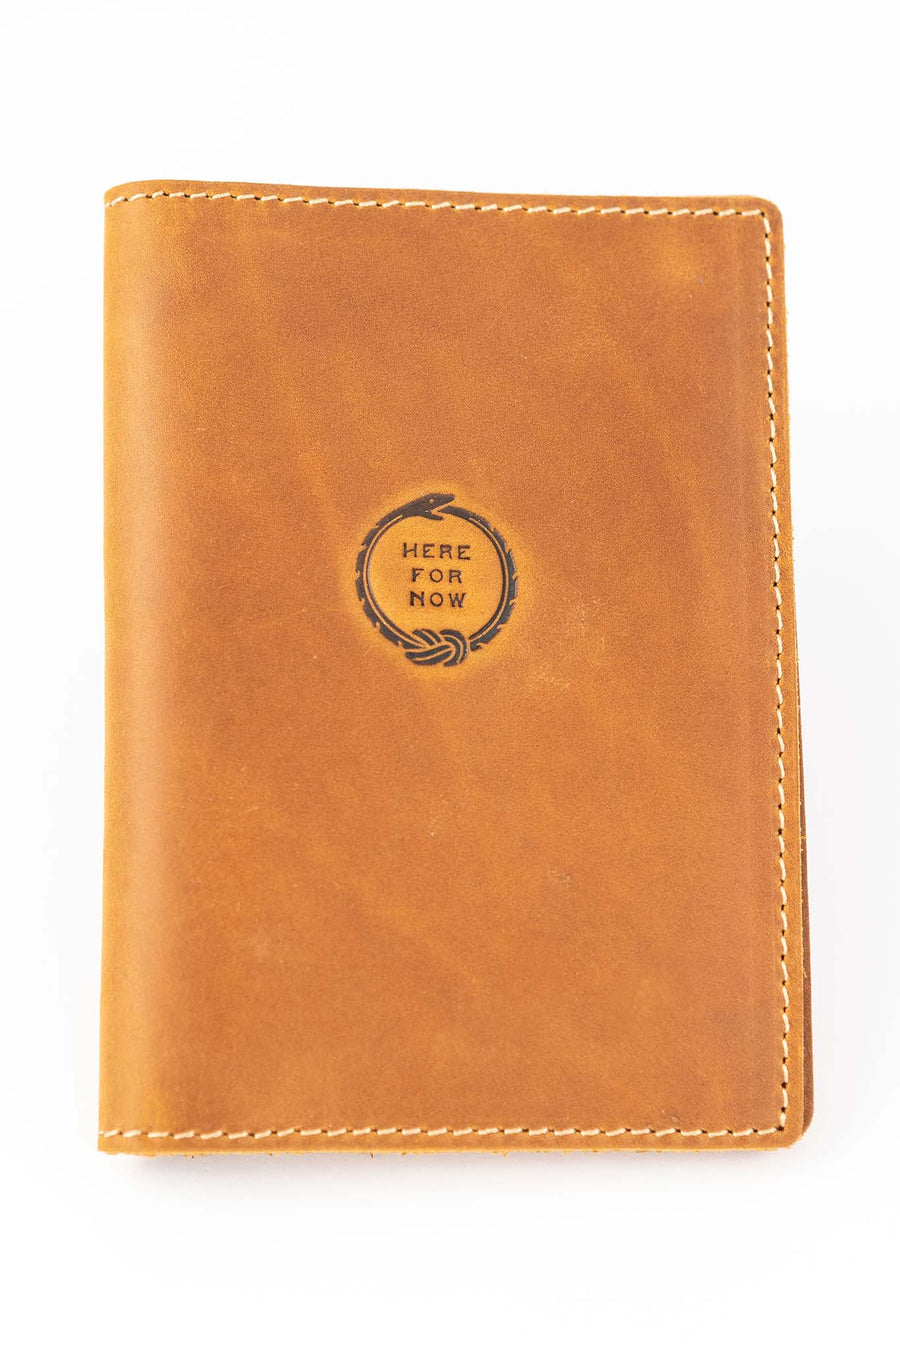 Handmade leather passport wallet made from genuine leather featuring embossed 'Here For Now' Ouroboros design